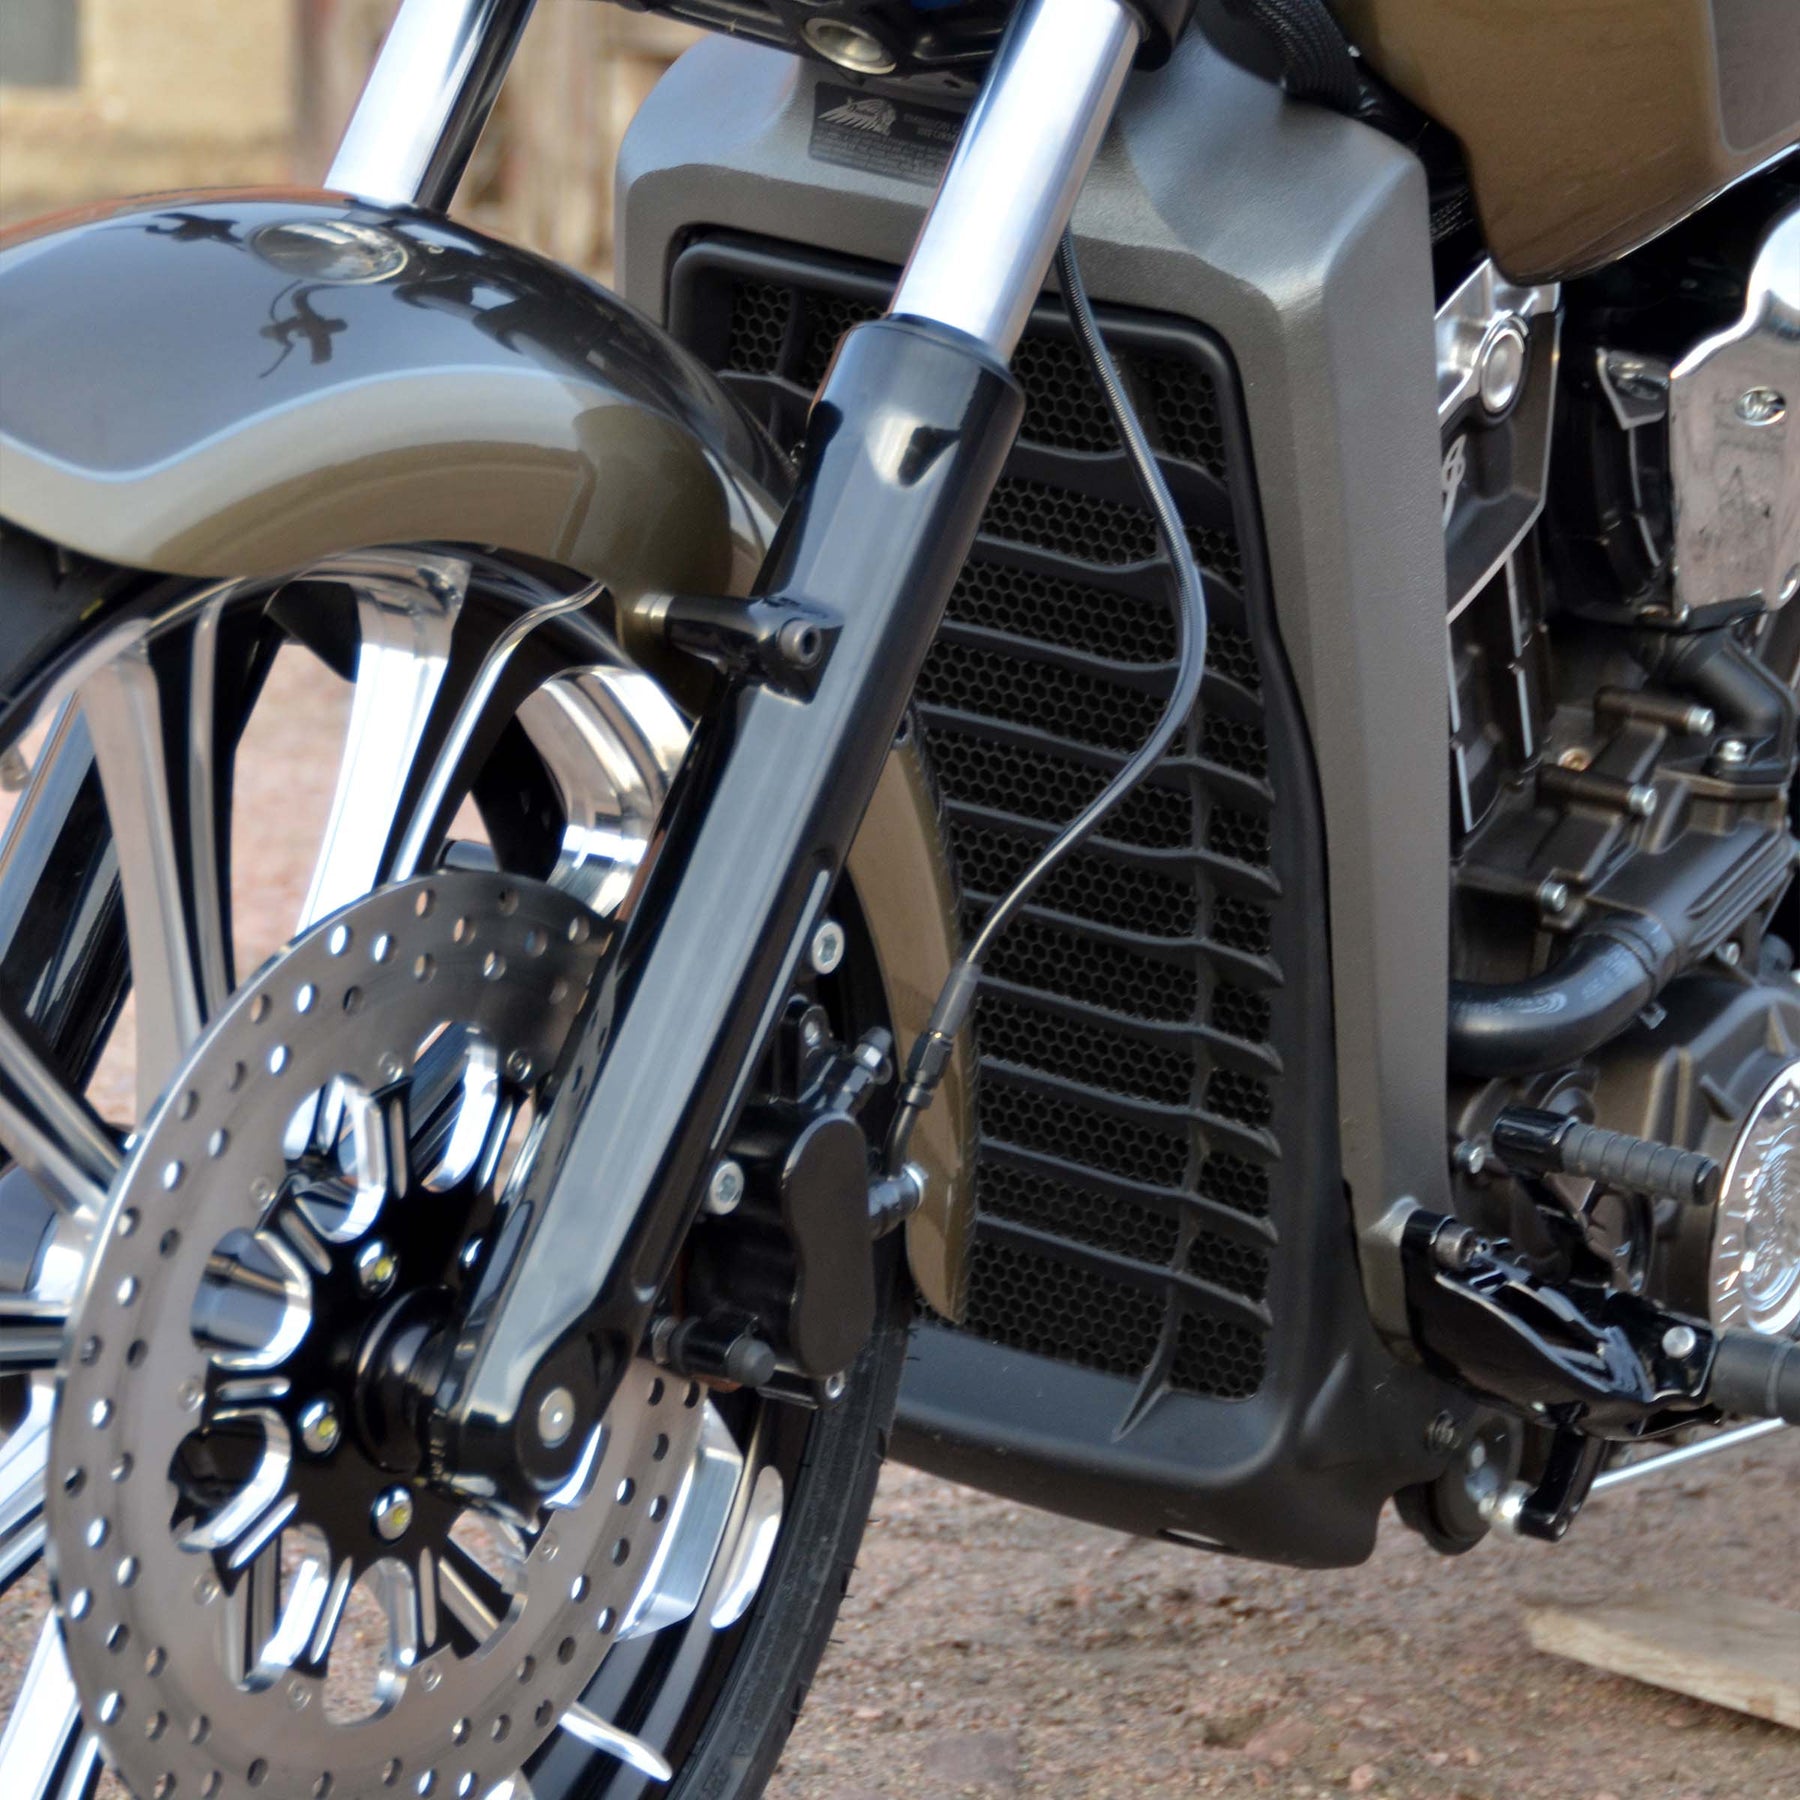 Black Outrider Rad Guard for Indian® Scout, Scout 60 and Bobber Motorcycles